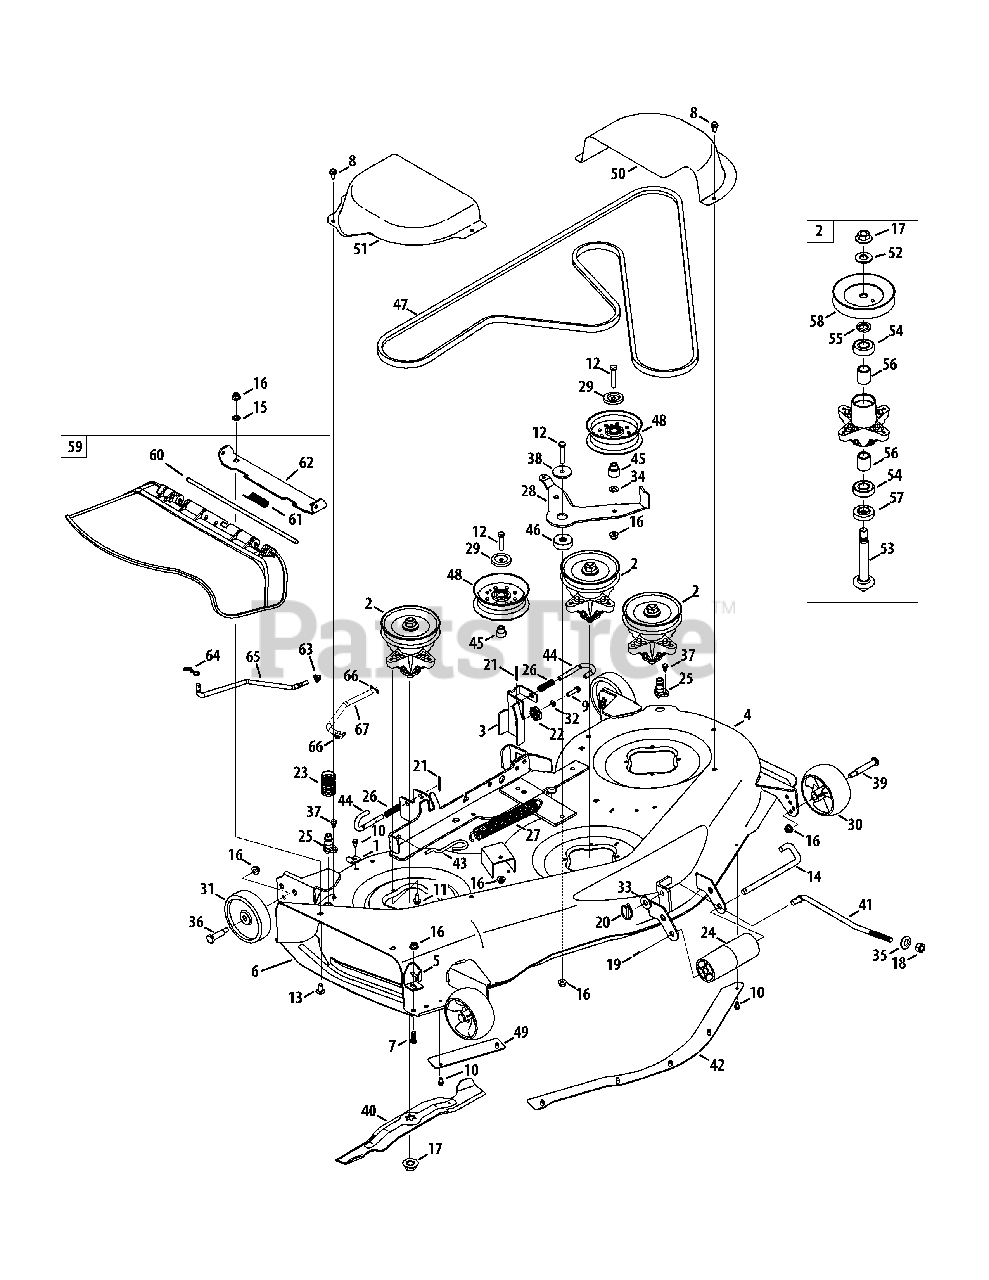 Cub Cadet Ltx 1050 Wiring Diagram For Your Needs